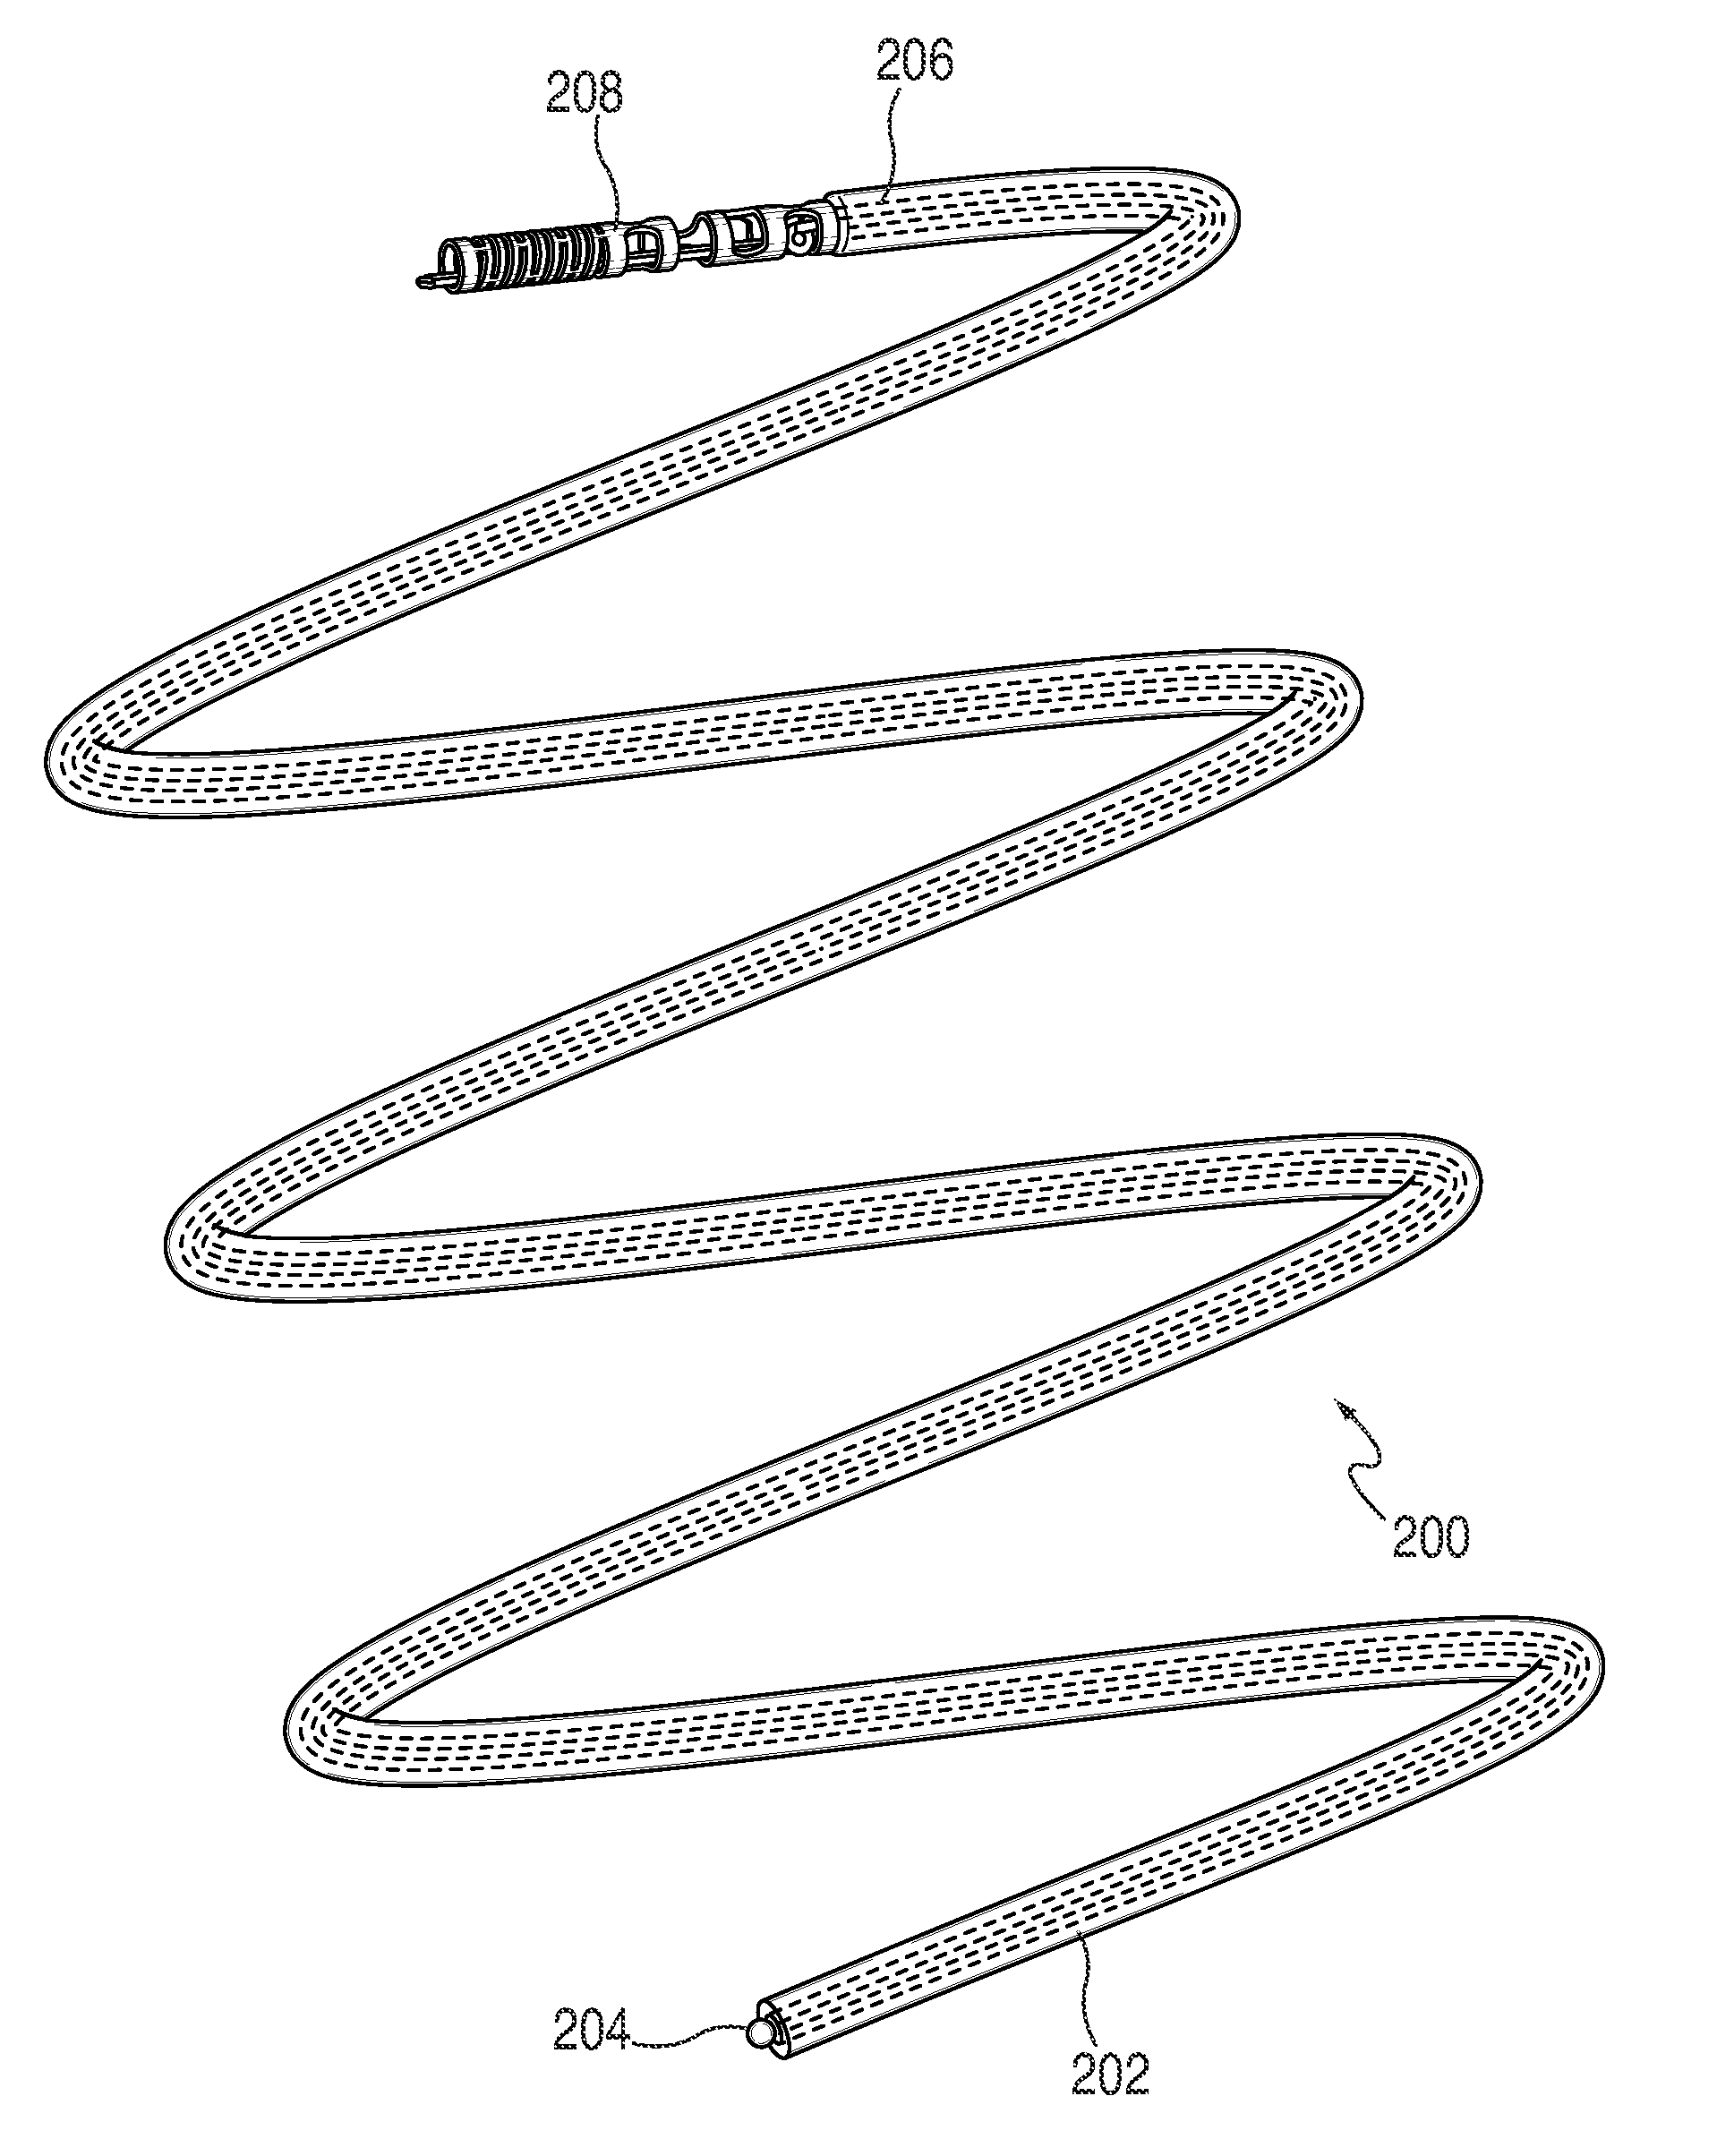 Vascular occlusion devices and methods